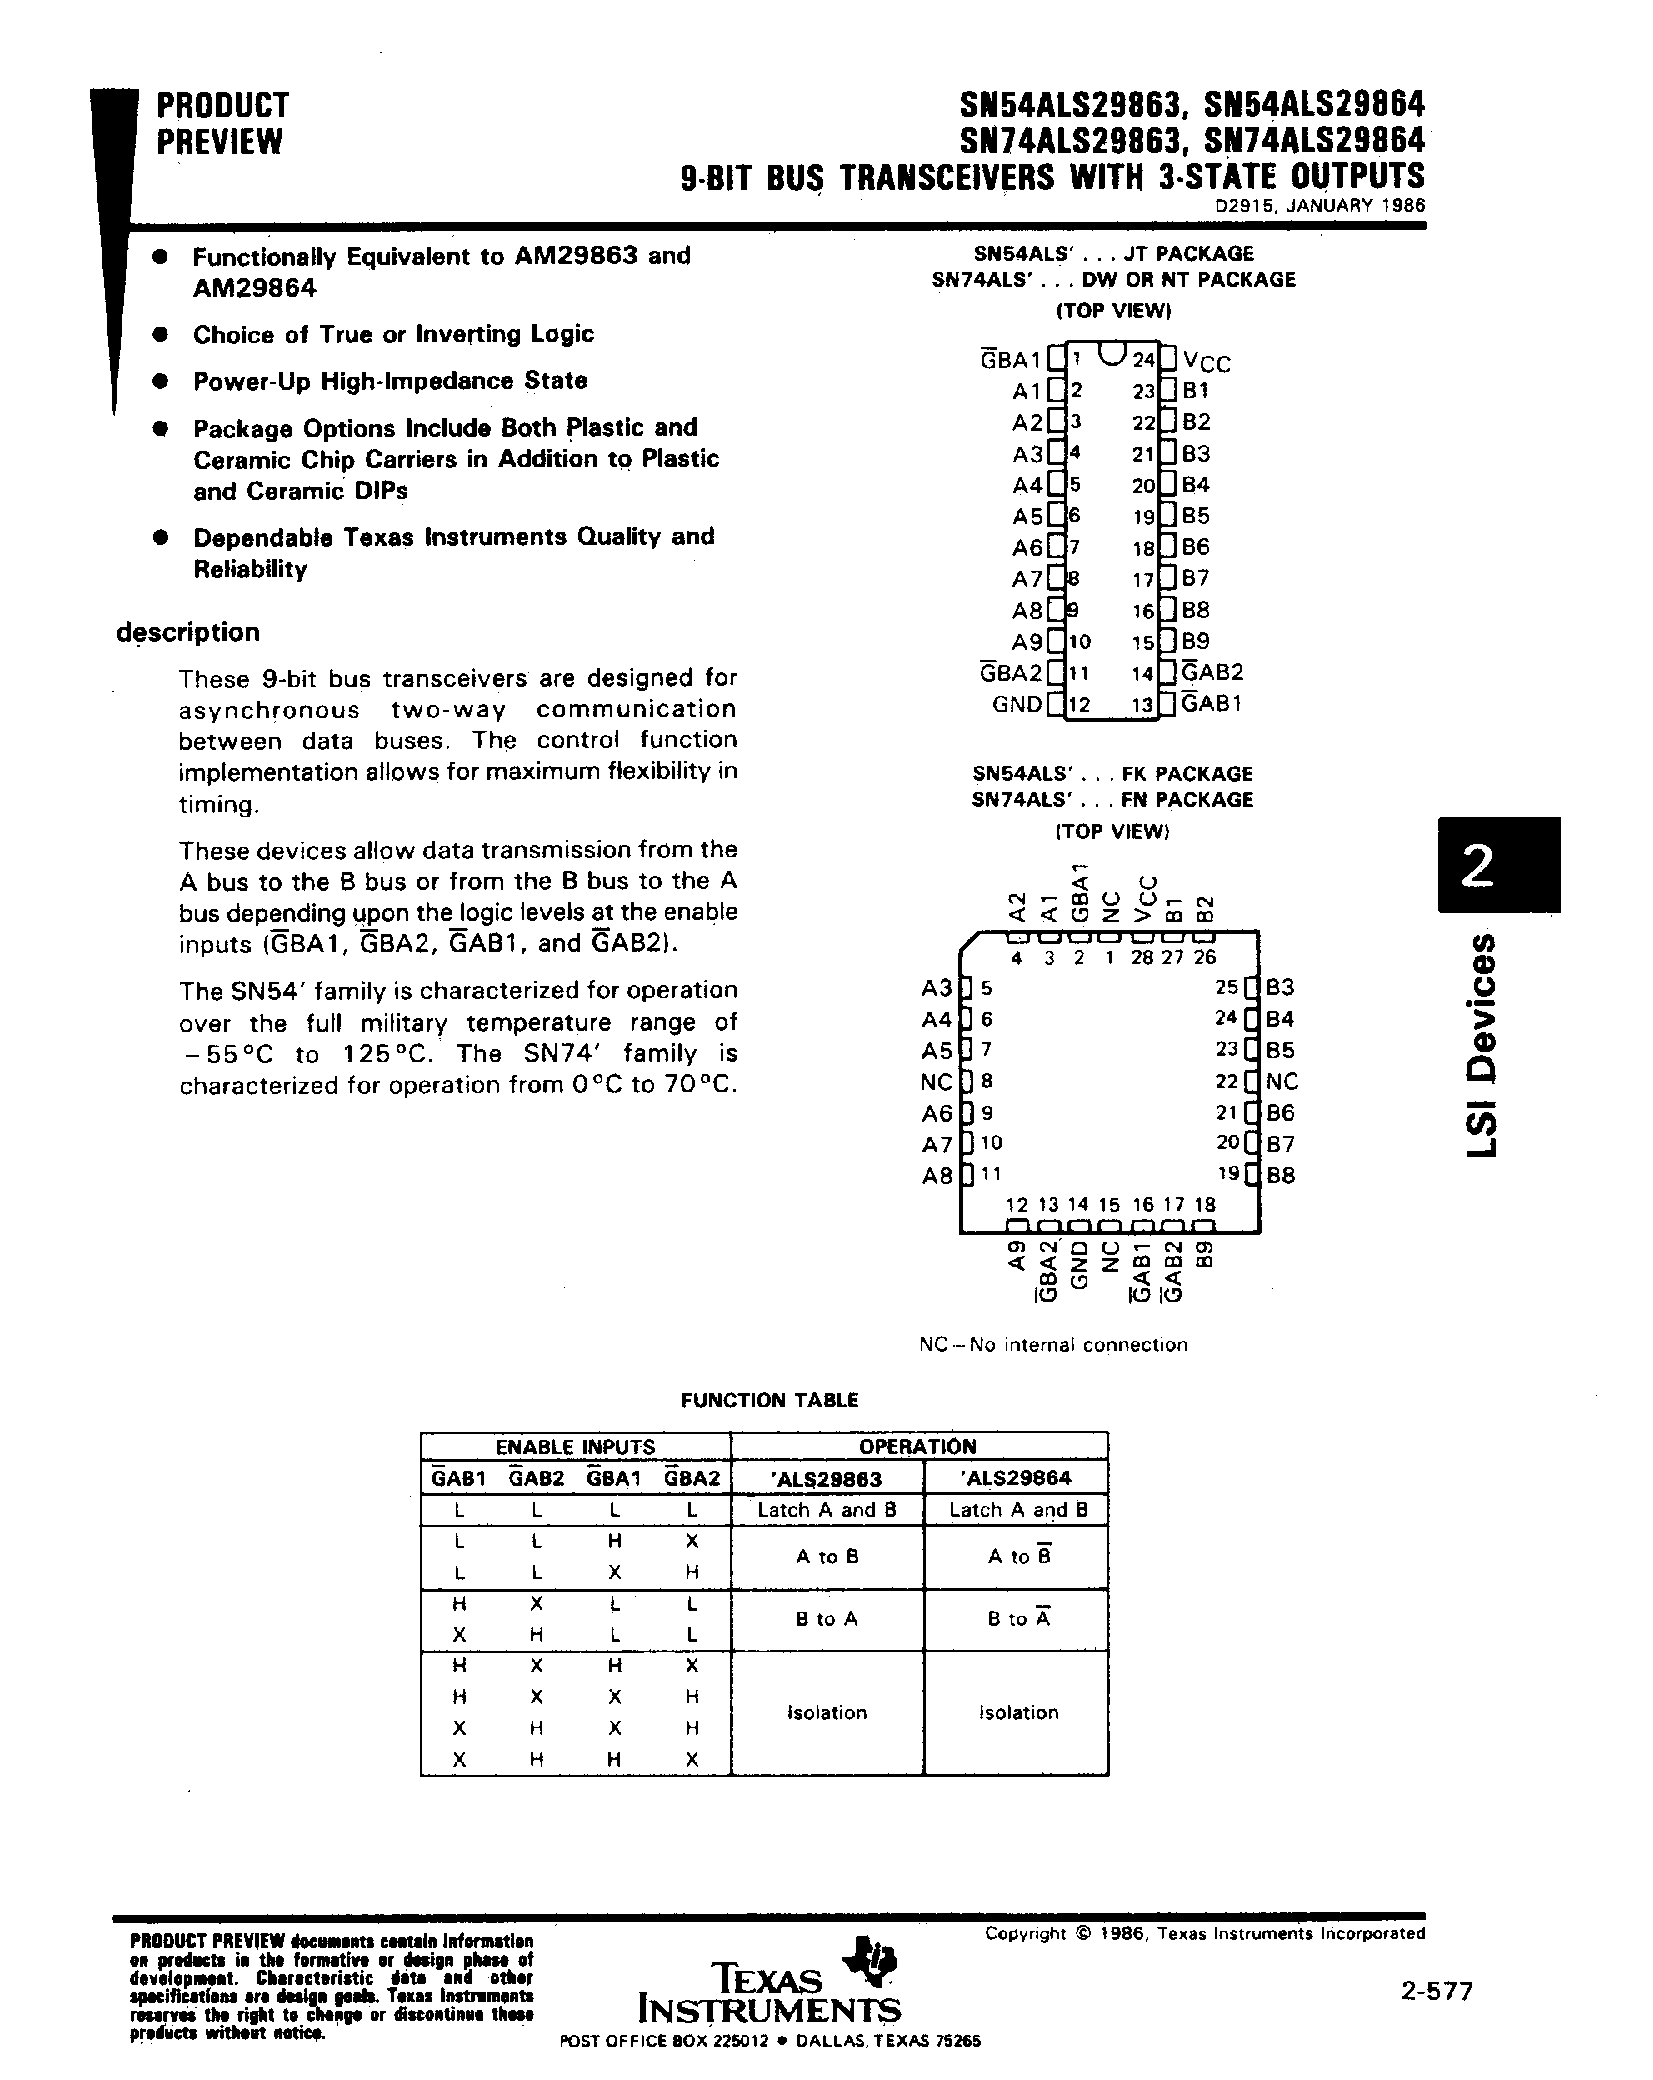 Datasheet SN74ALS29864 - (SN74ALS29863) 9 Nit Bus Transceivers with 3 State Outputs page 1